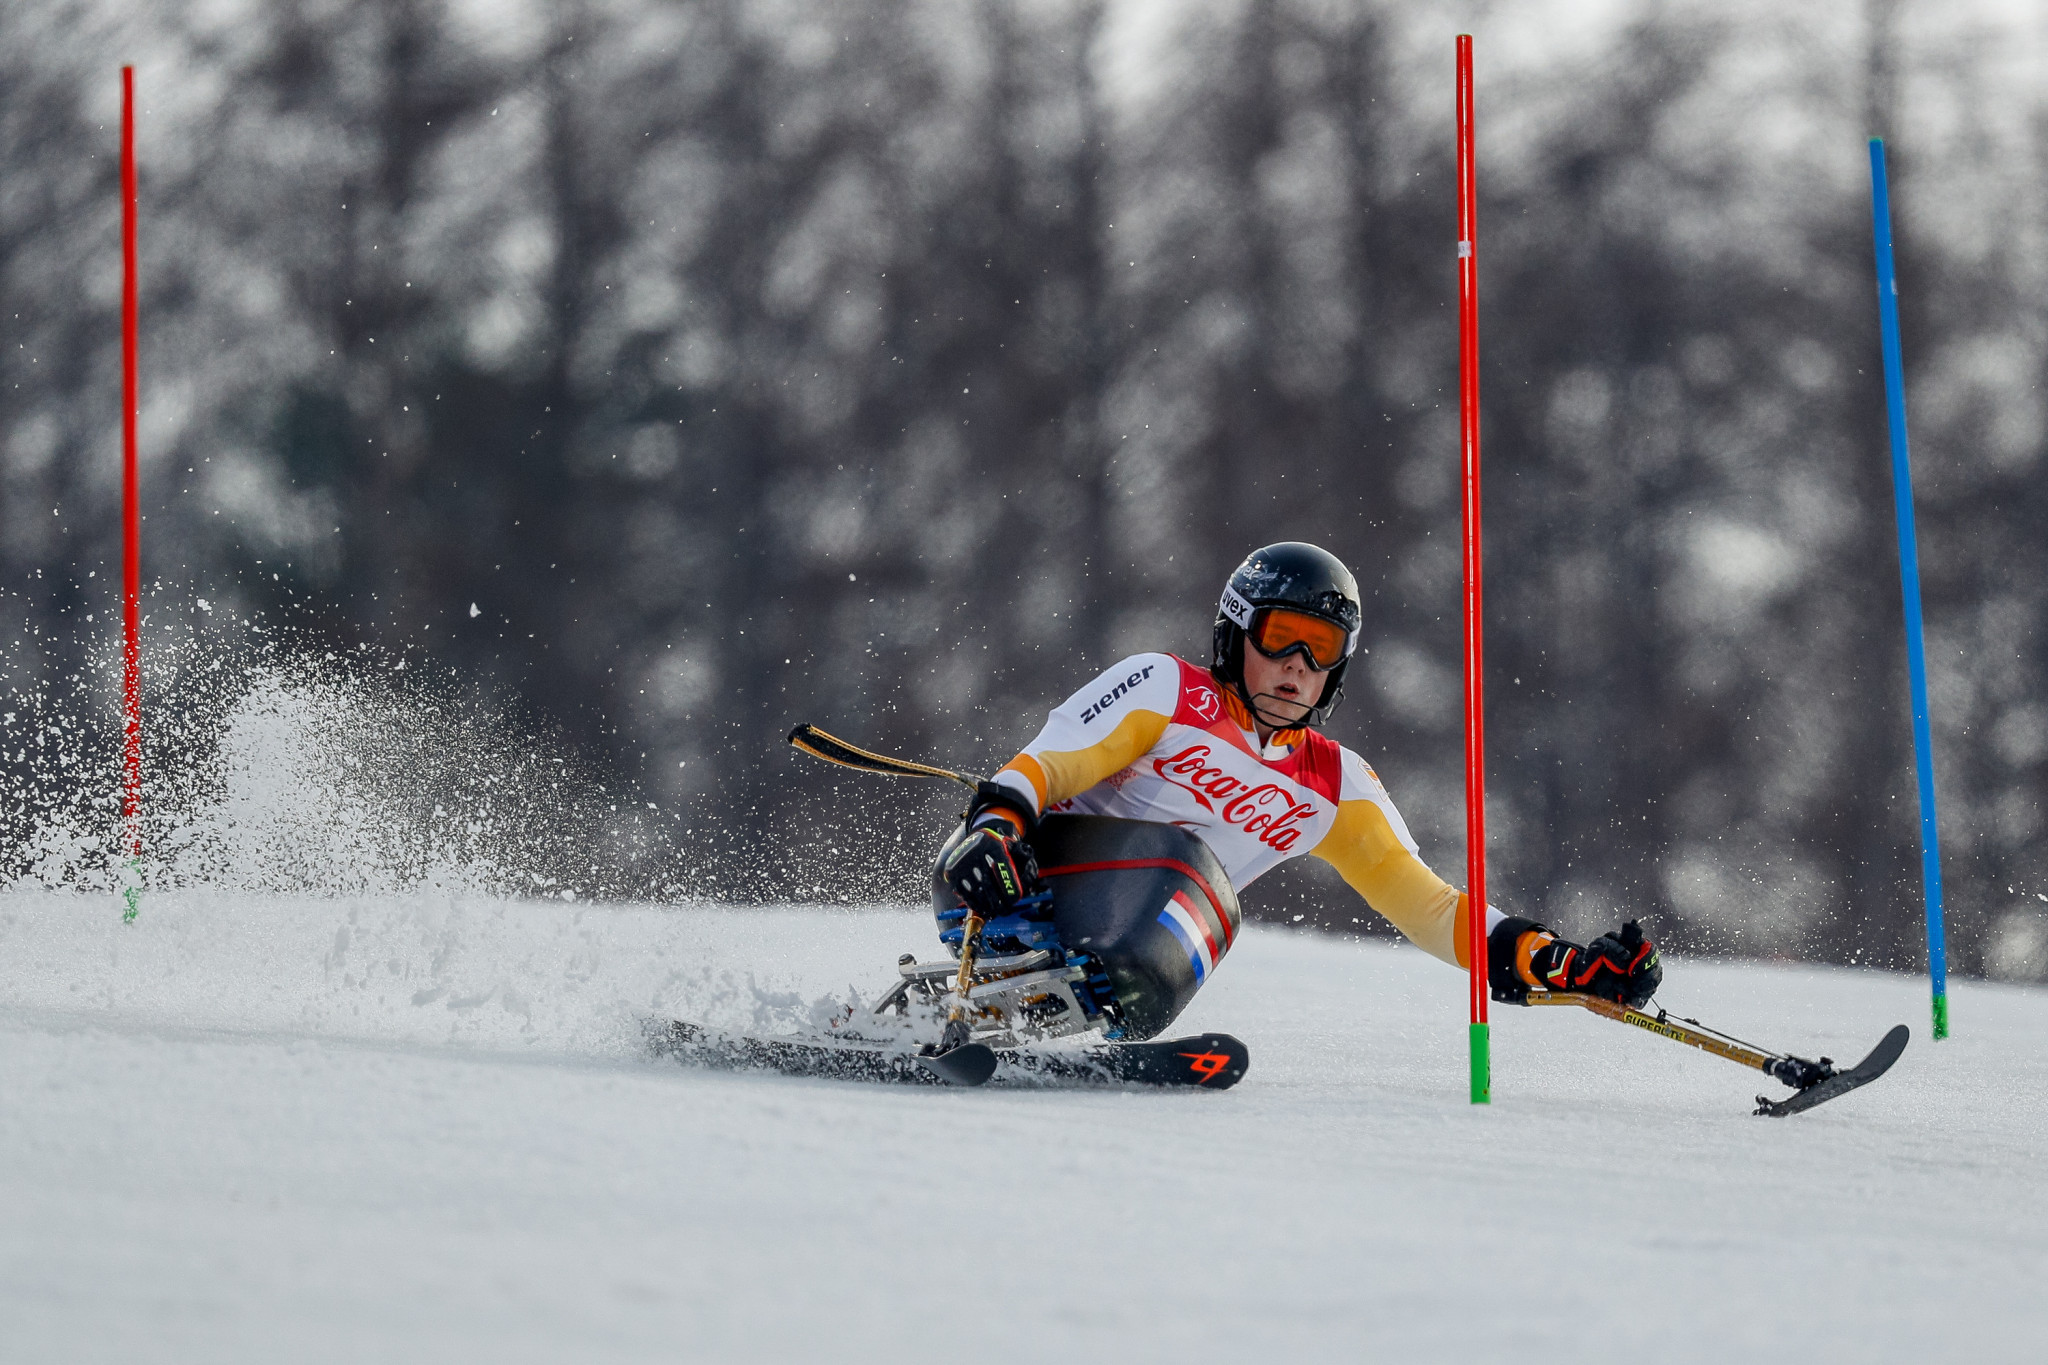 Kampschreur among winners on day of comebacks at World Para Alpine Skiing World Cup in La Molina